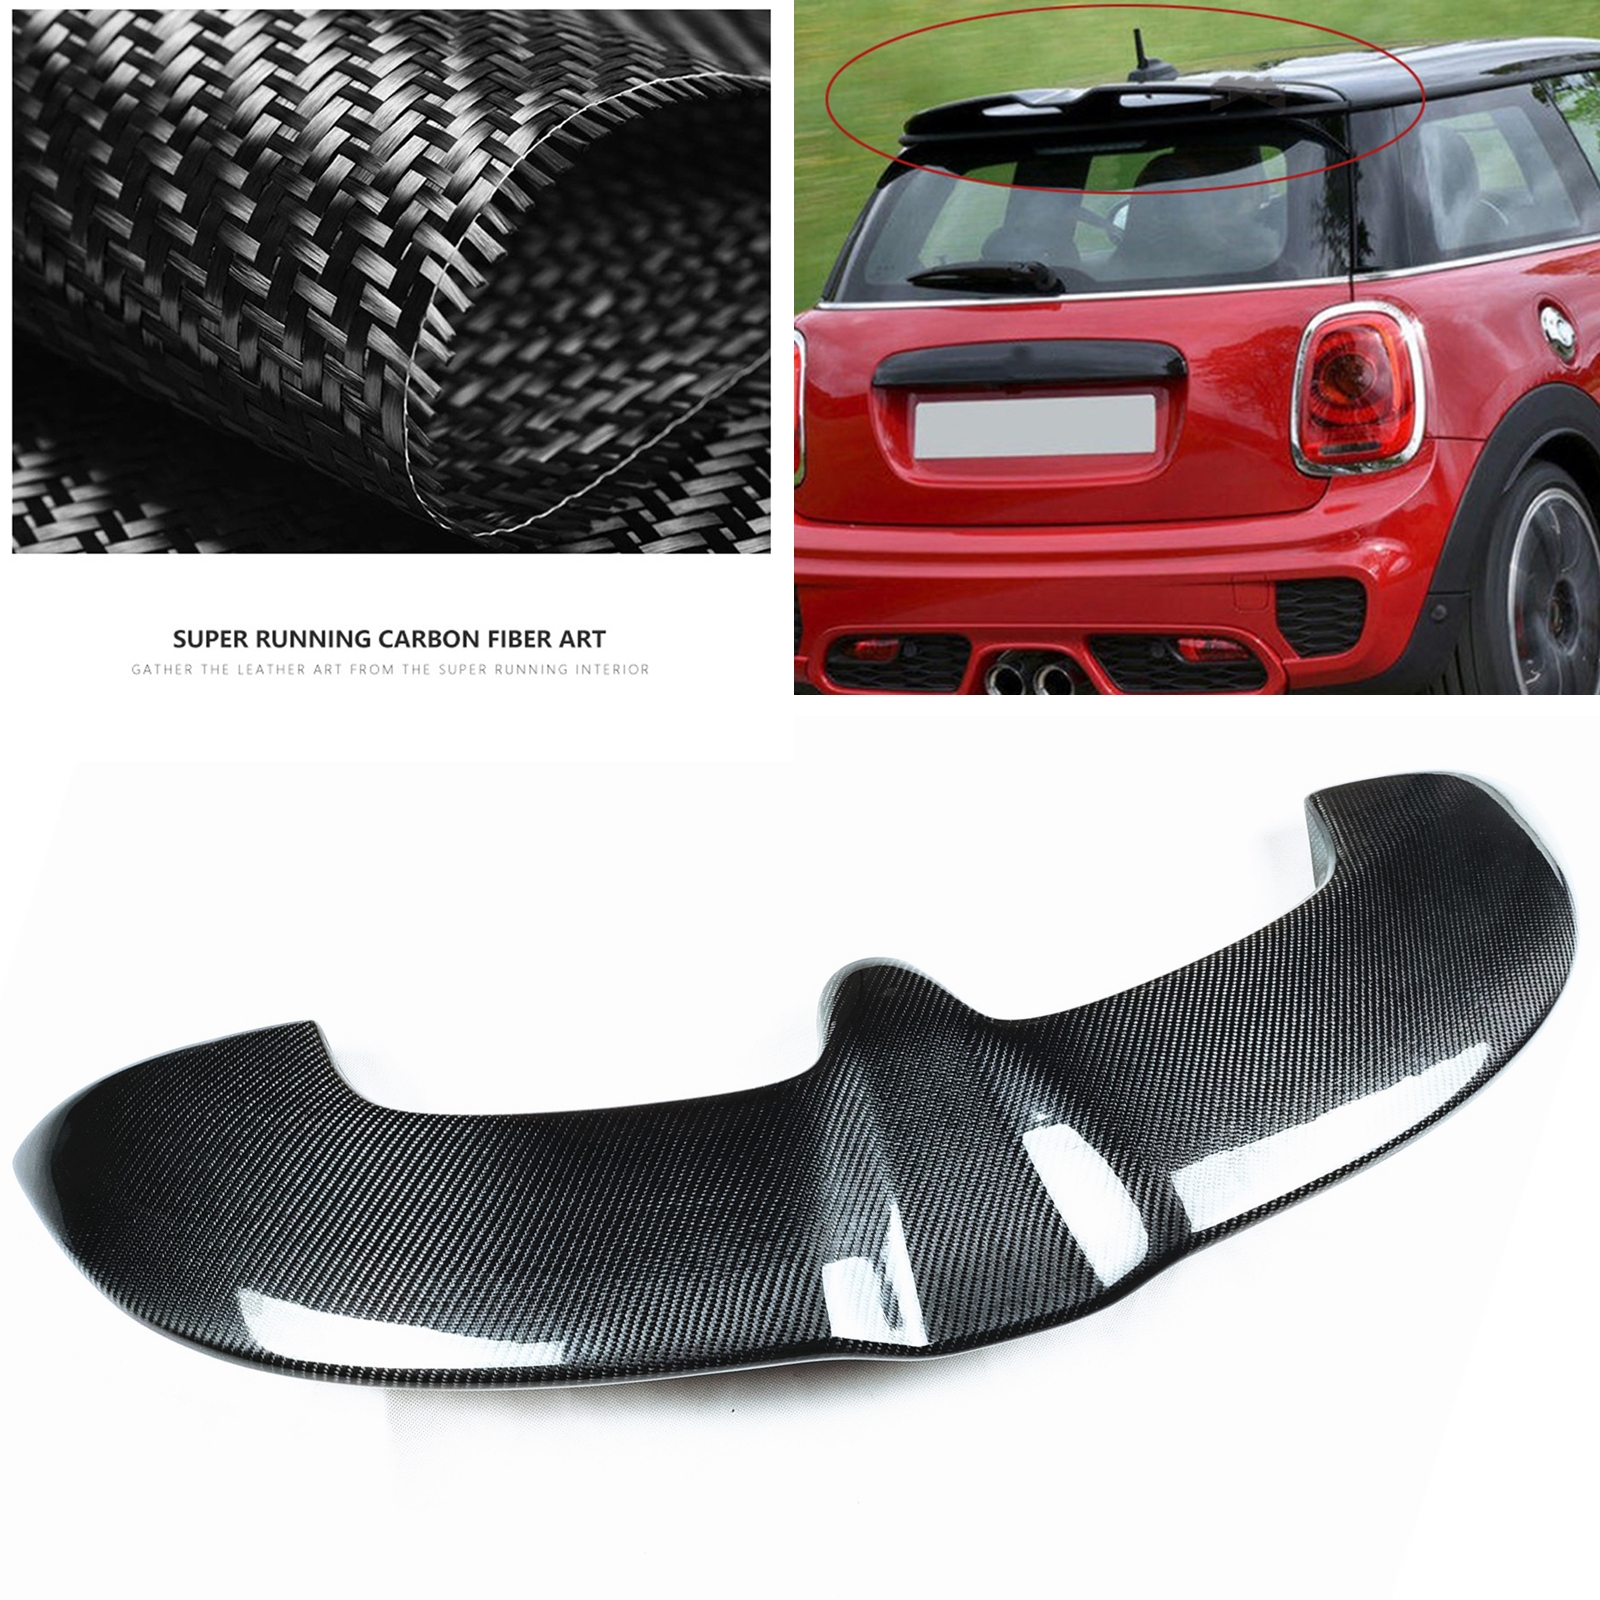 Automotive styling carbon fiber RK rear spoiler roof window wing racing auto  body kit for F56 Mini Cooper S (S only)